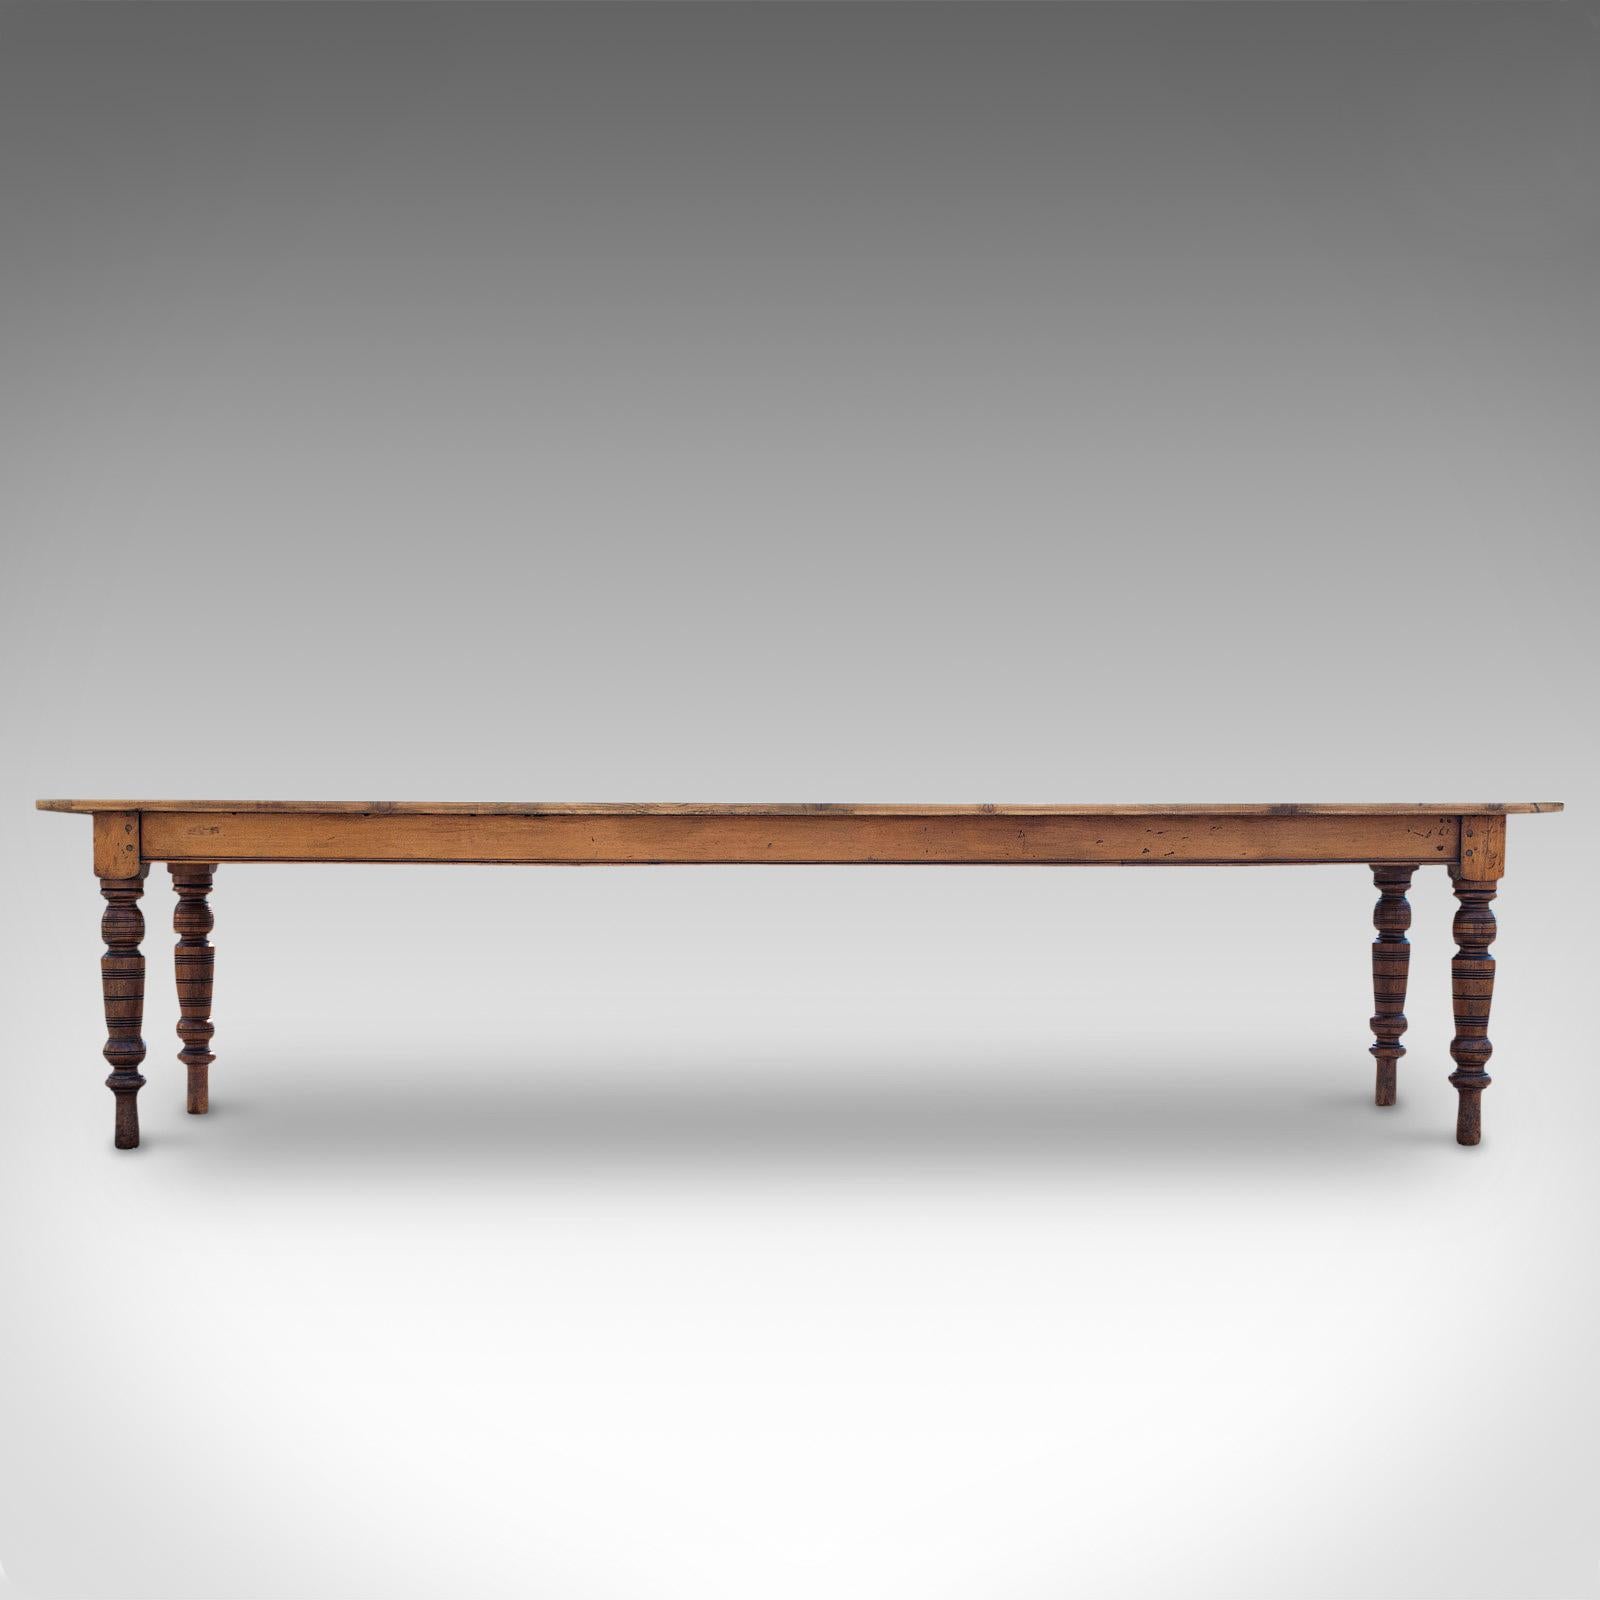 This is a large antique farmhouse table. An English, pine over mahogany kitchen or dining table for 10-12 people, dating to the Victorian period and later, circa 1900.

Of long and narrow proportion at 10' 4